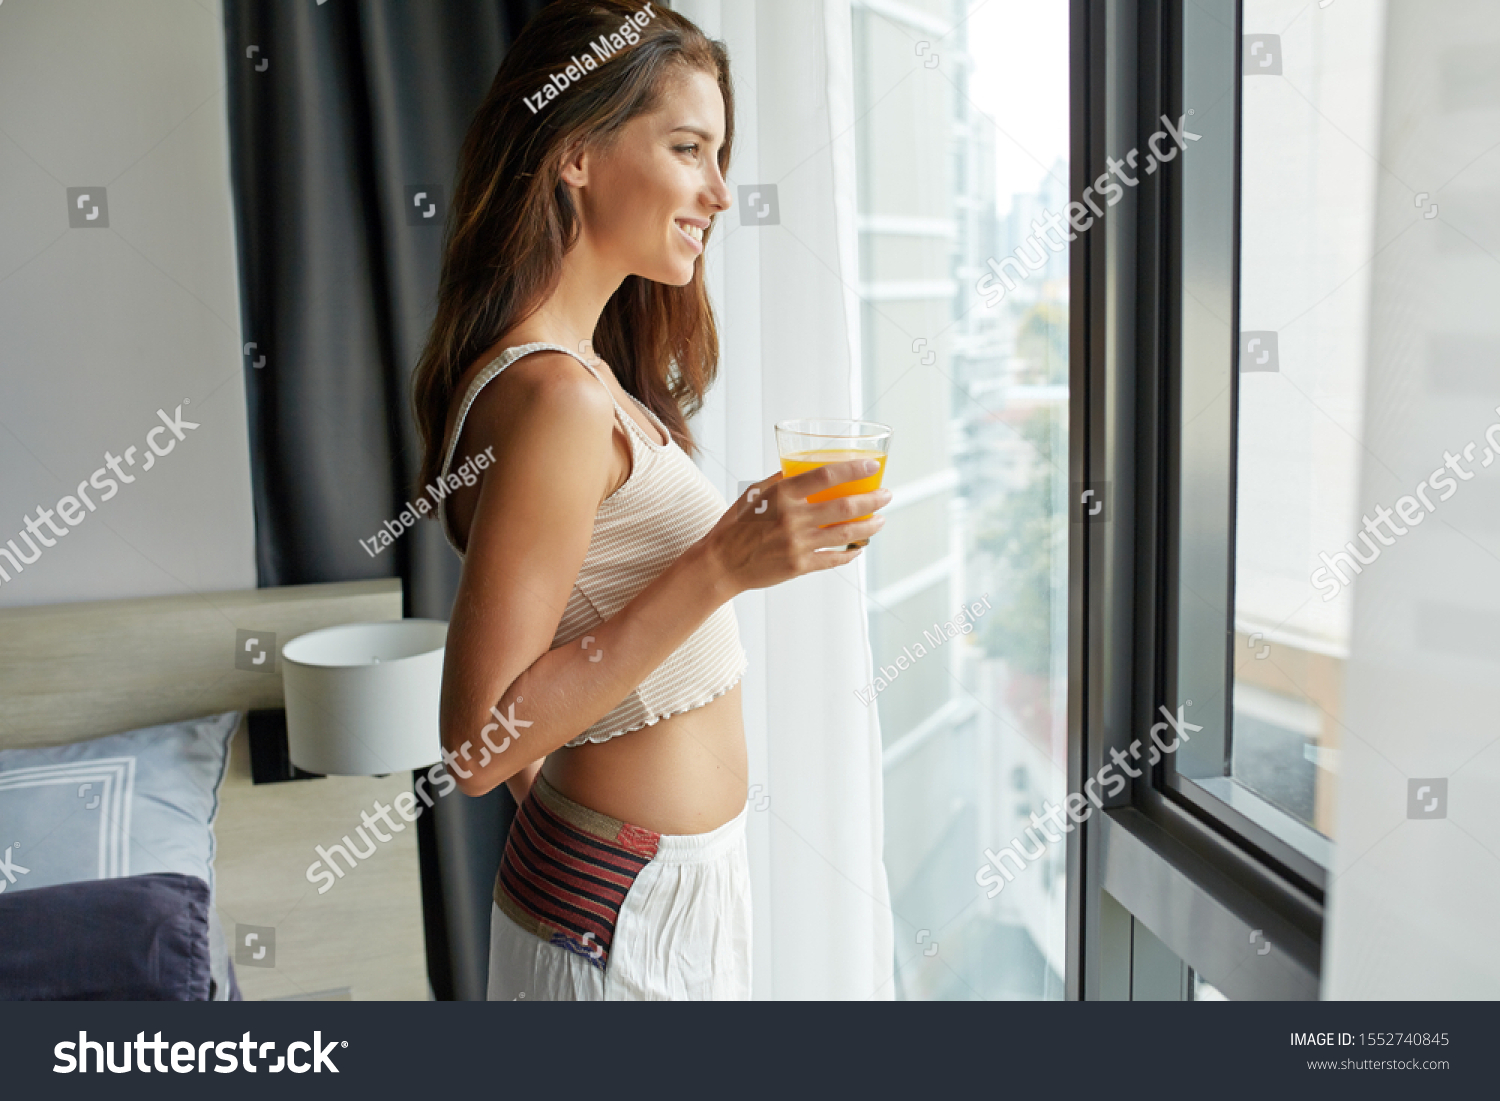 A woman relaxes in the bedroom and drinks orange juice #1552740845